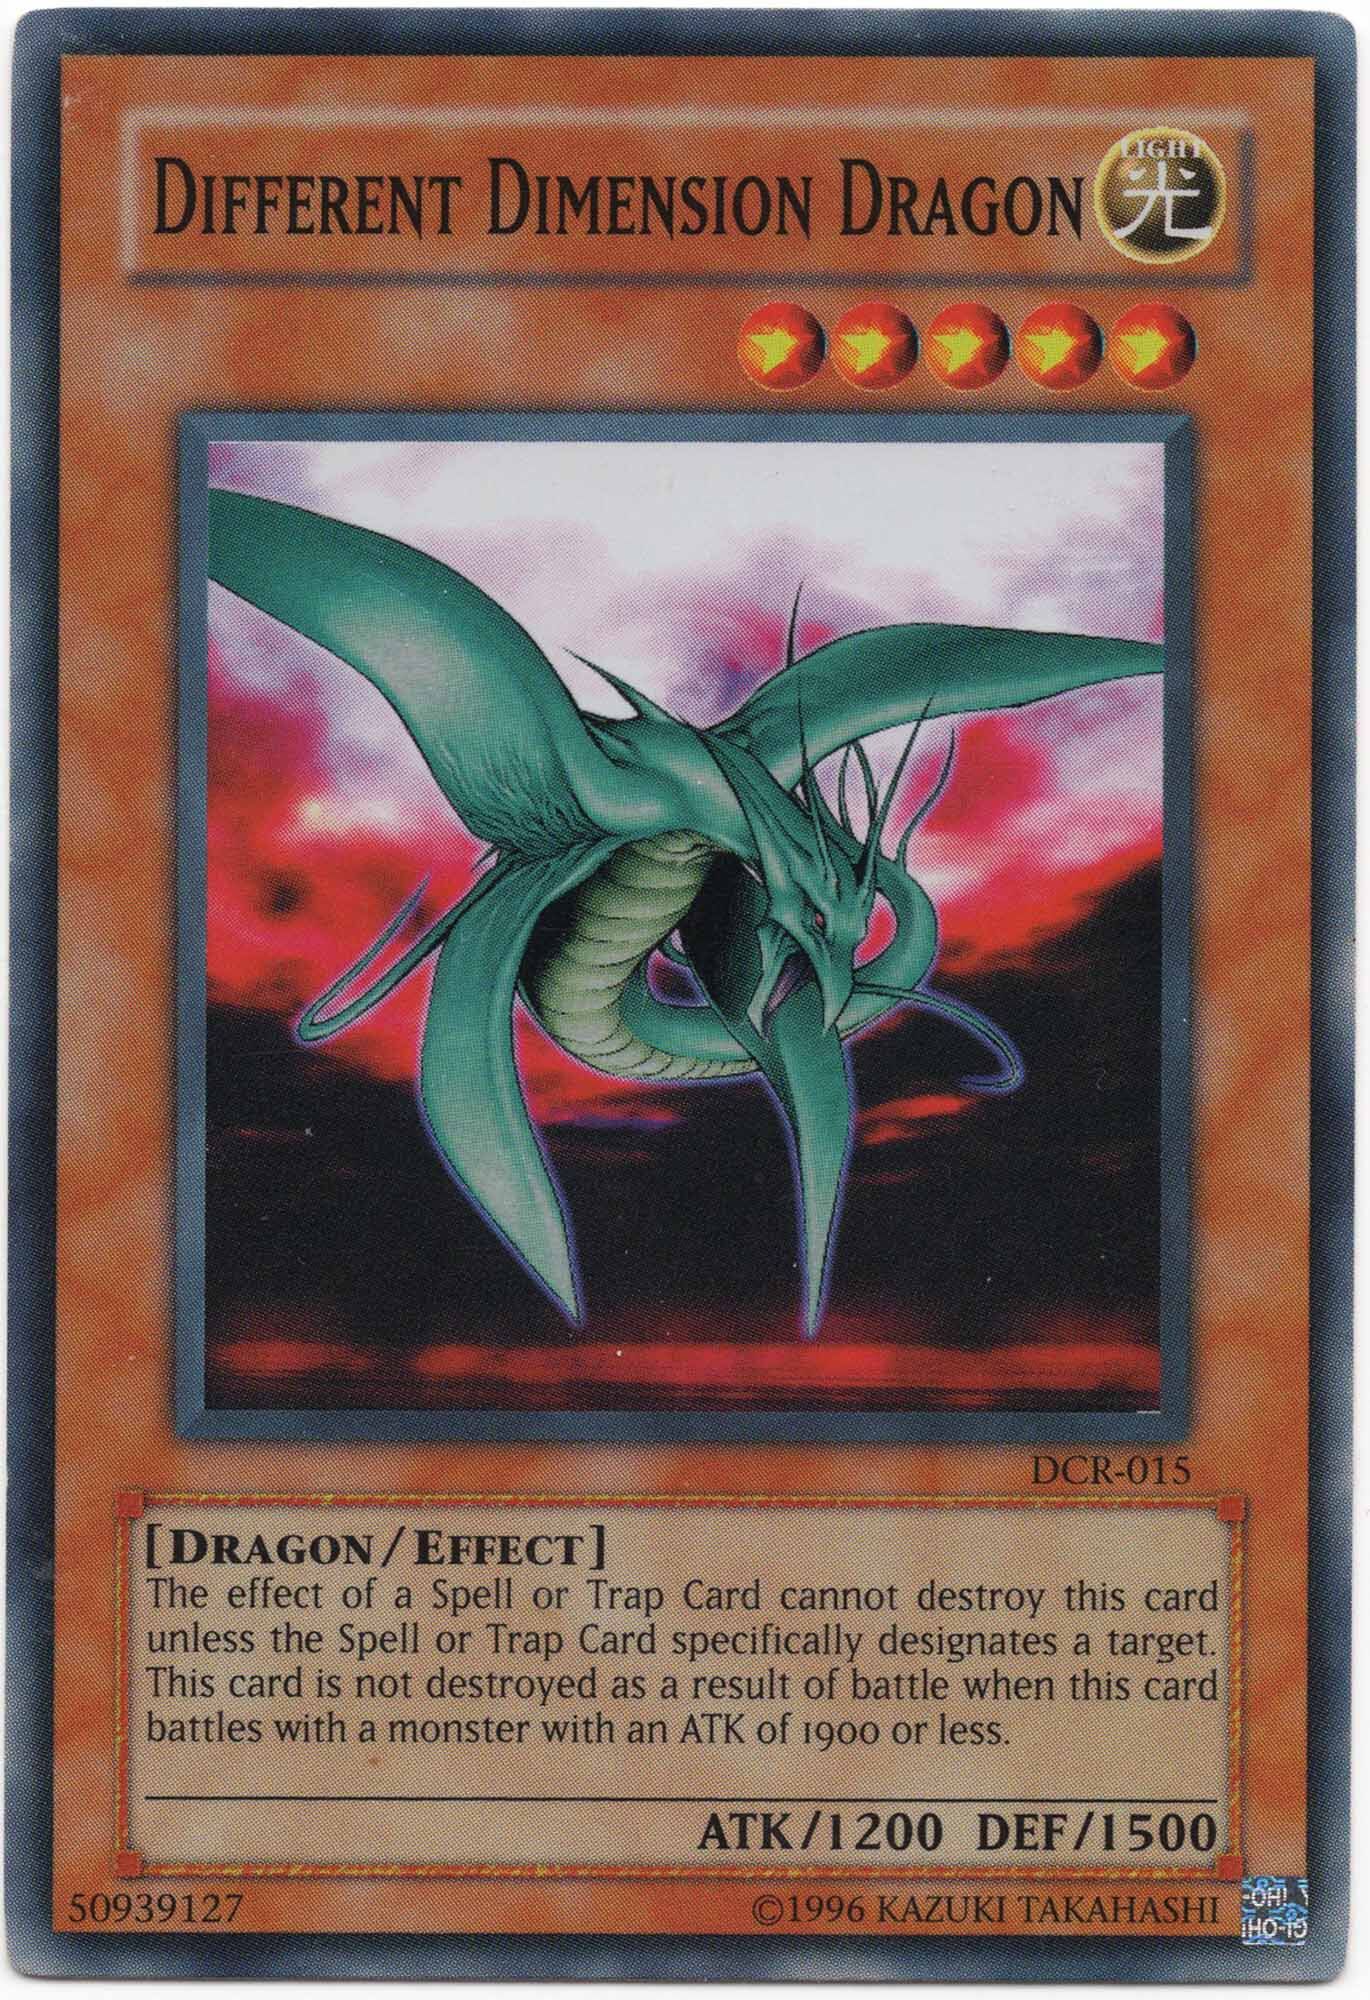 Different Dimension Dragon - DCR-015 - Super Rare - Lightly Played